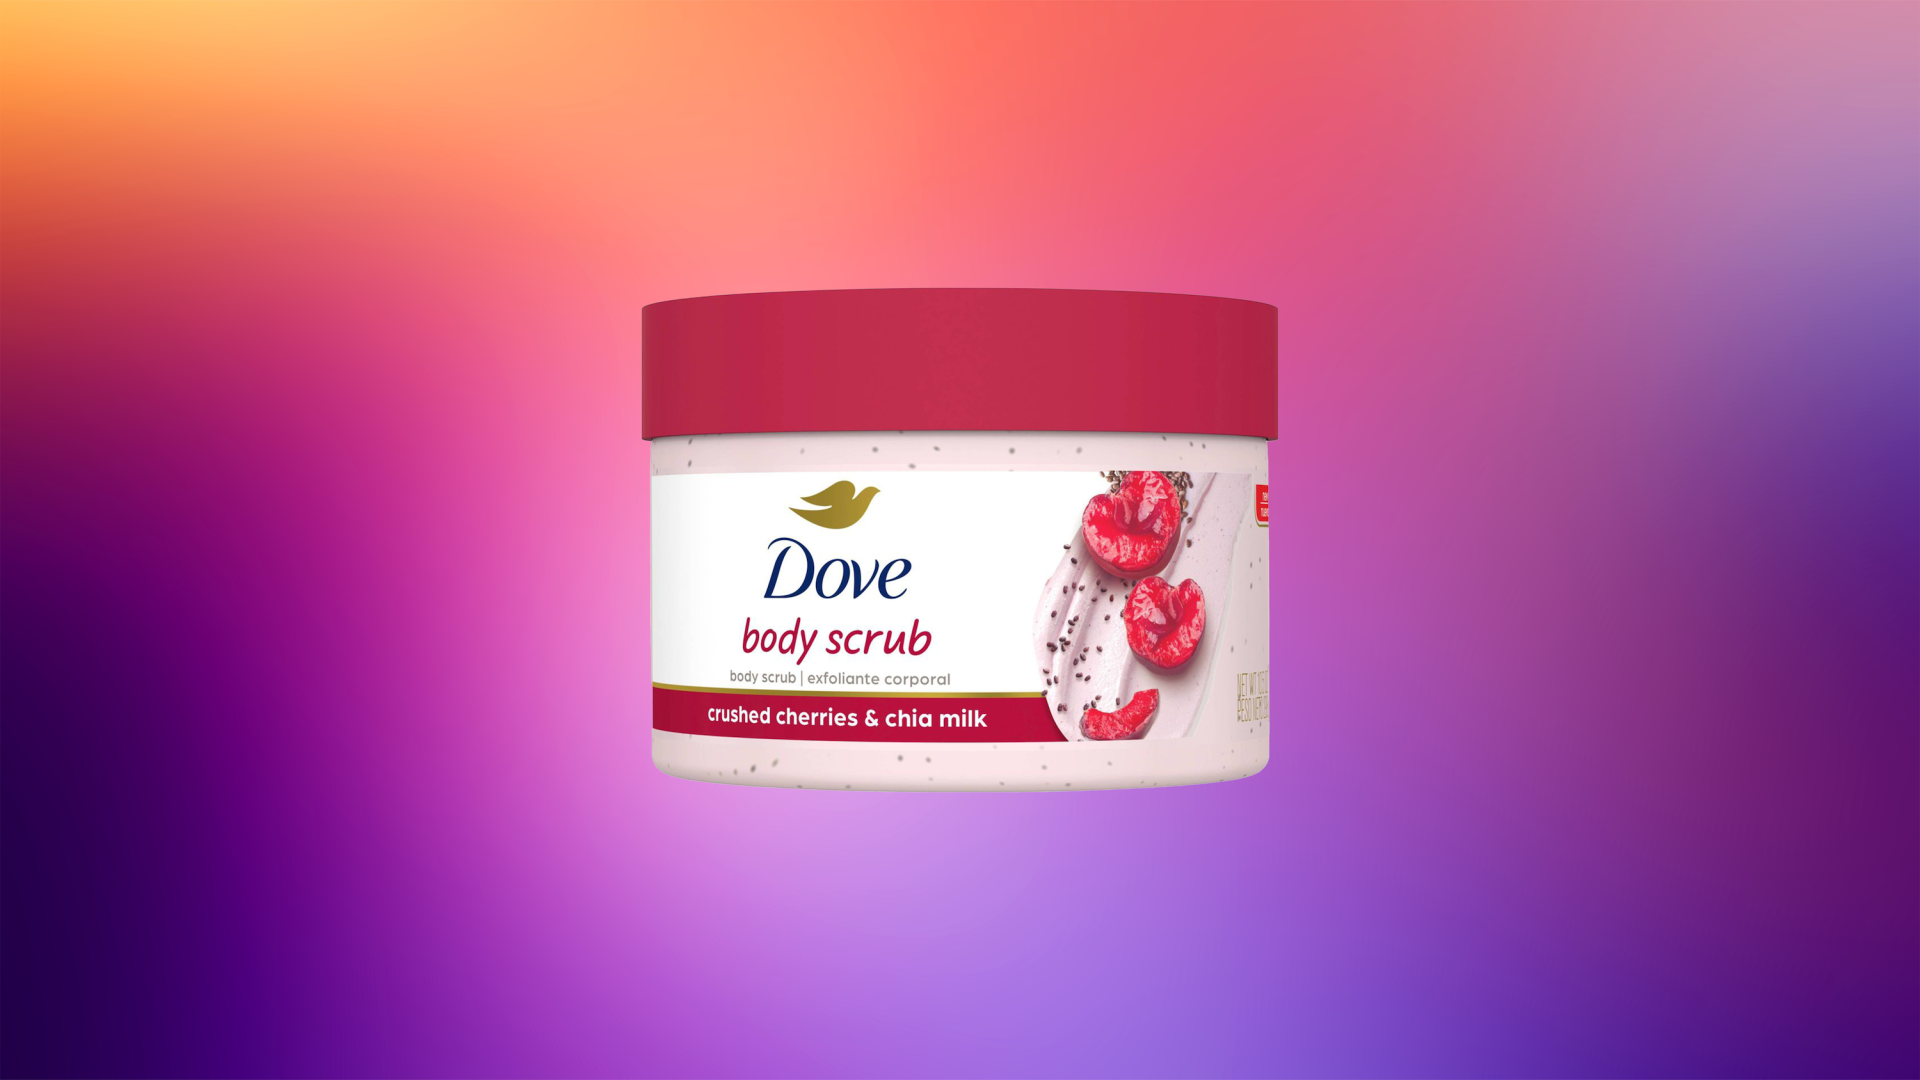 Product Of The Week: Dove Body Scrub